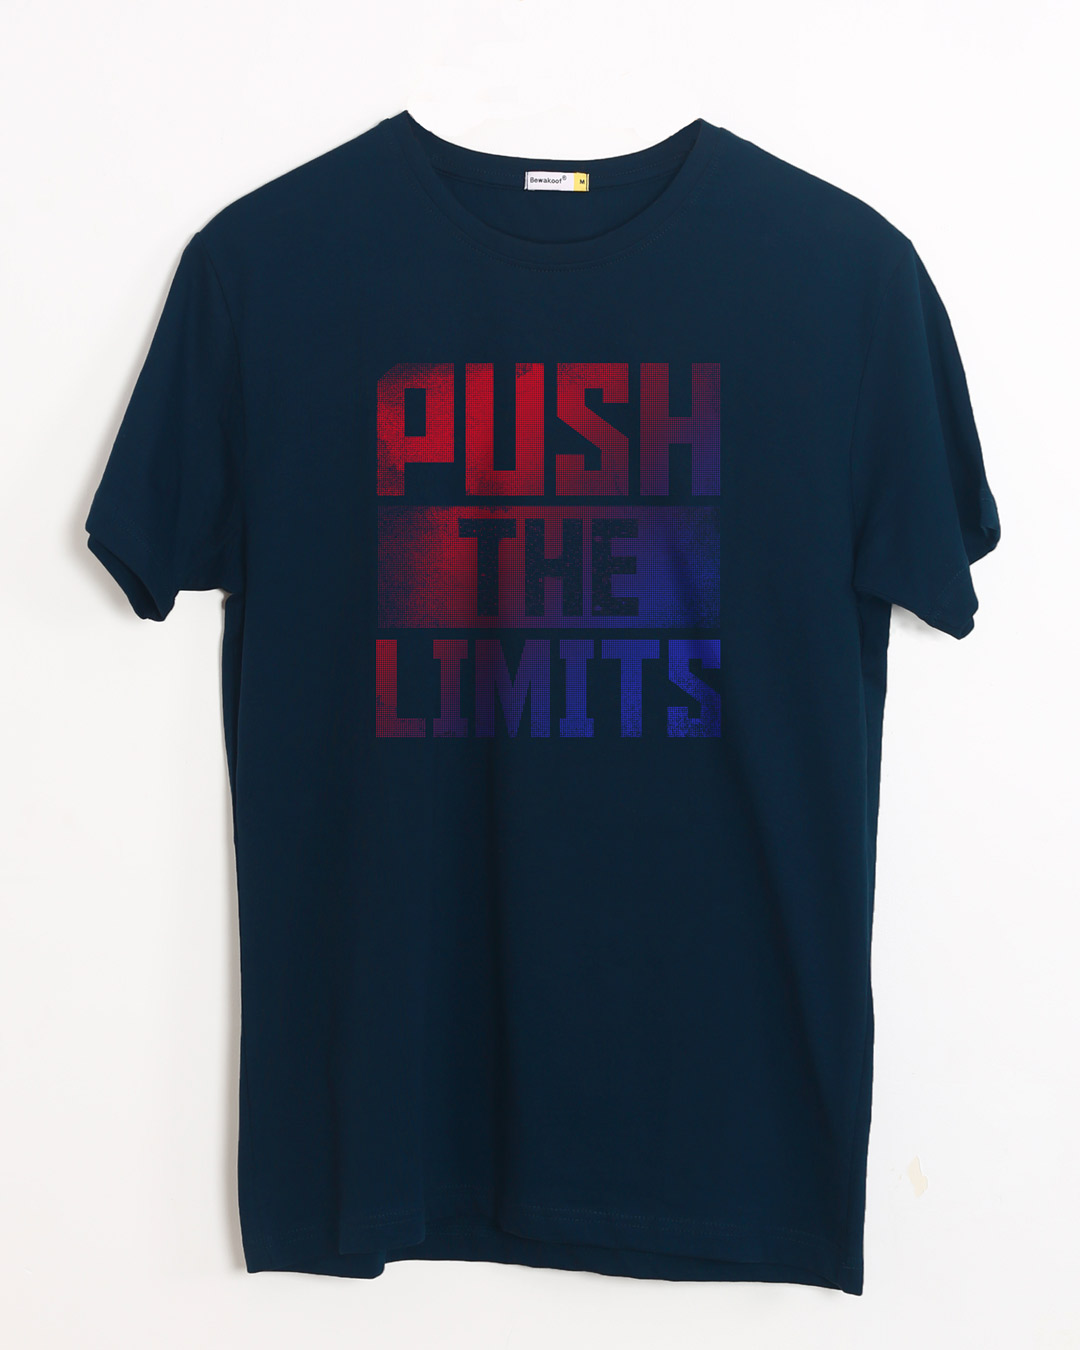 Buy Limits Are Pushed Half Sleeve T-Shirt for Men blue Online at Bewakoof